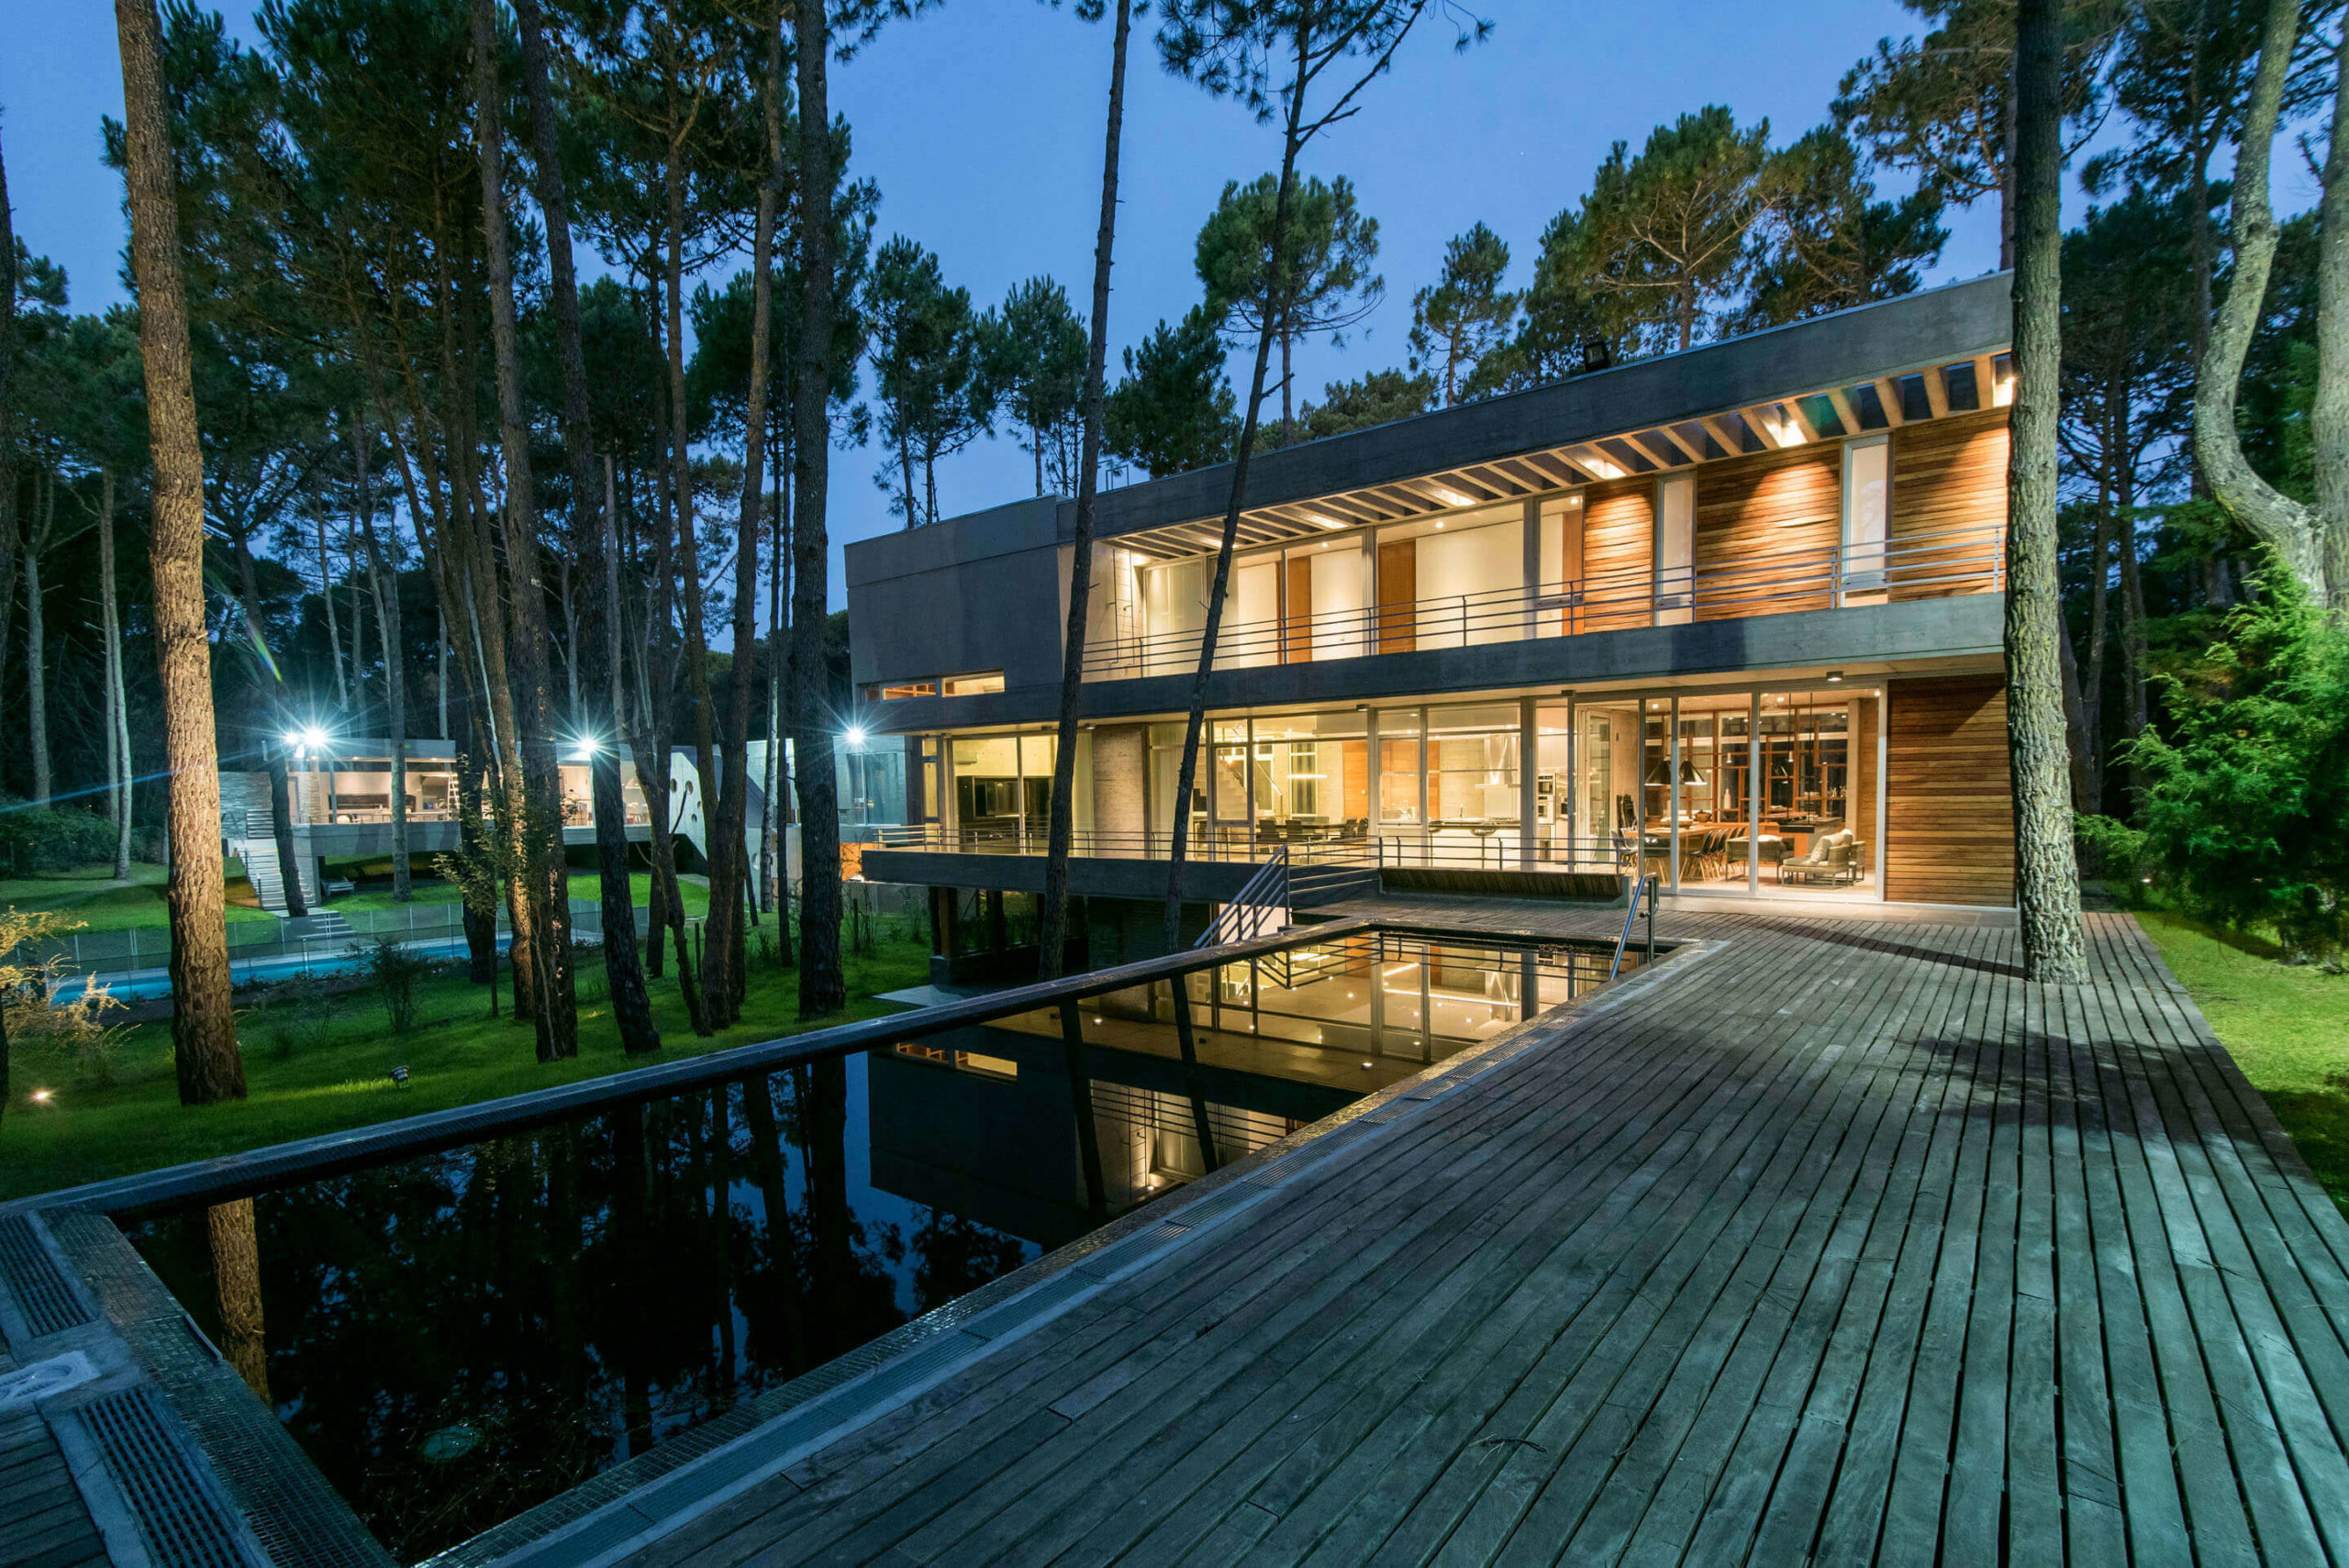 Beach house in the woods